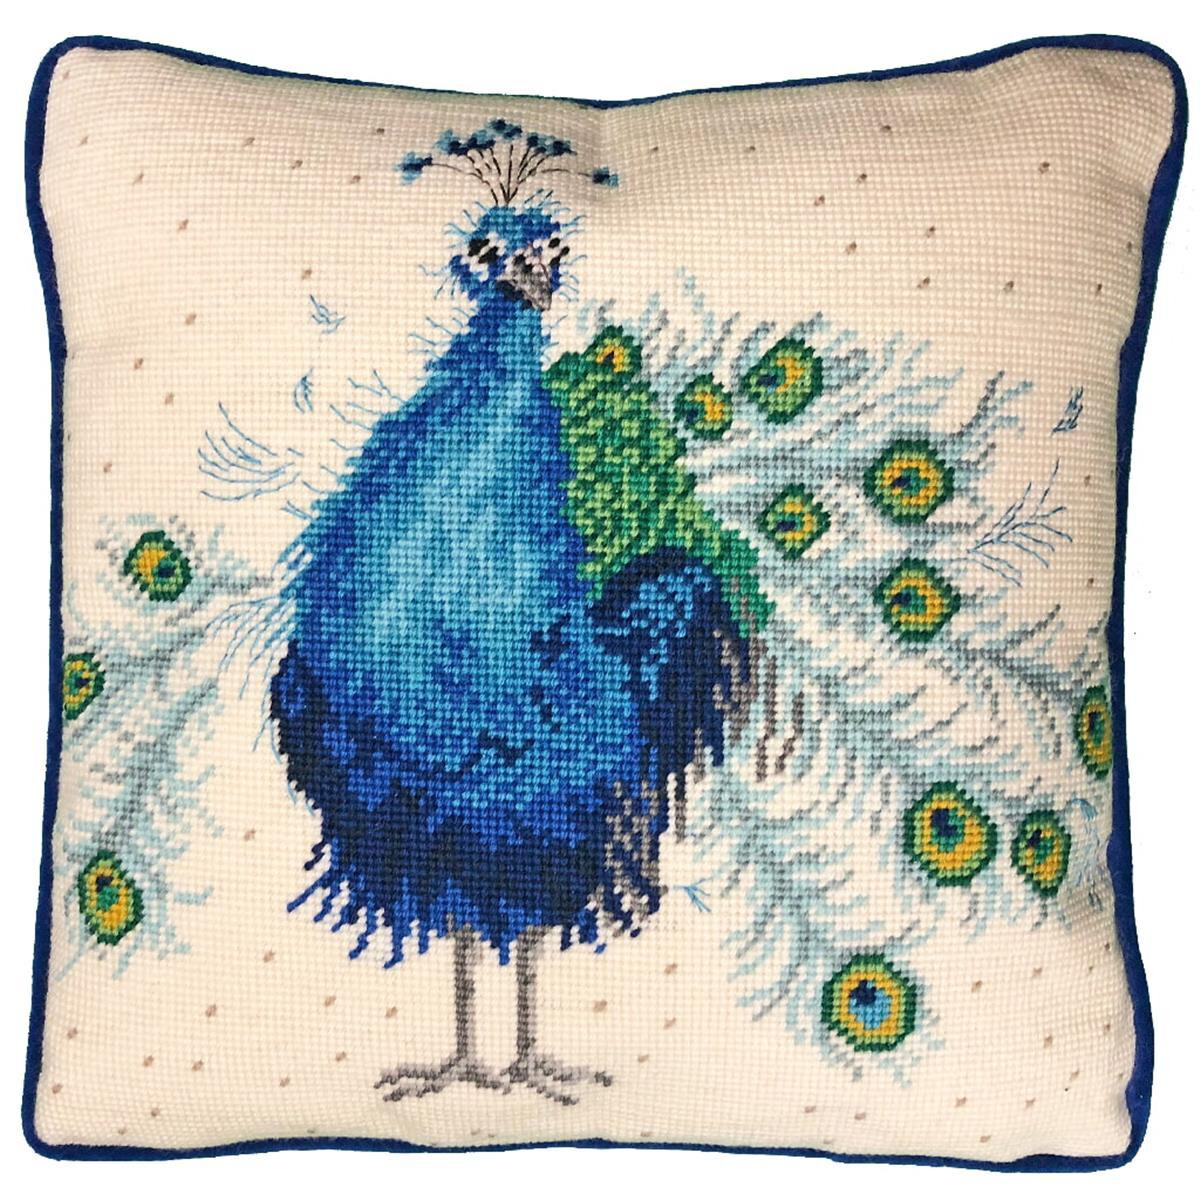 A square cushion with an embroidery pack design of a blue...